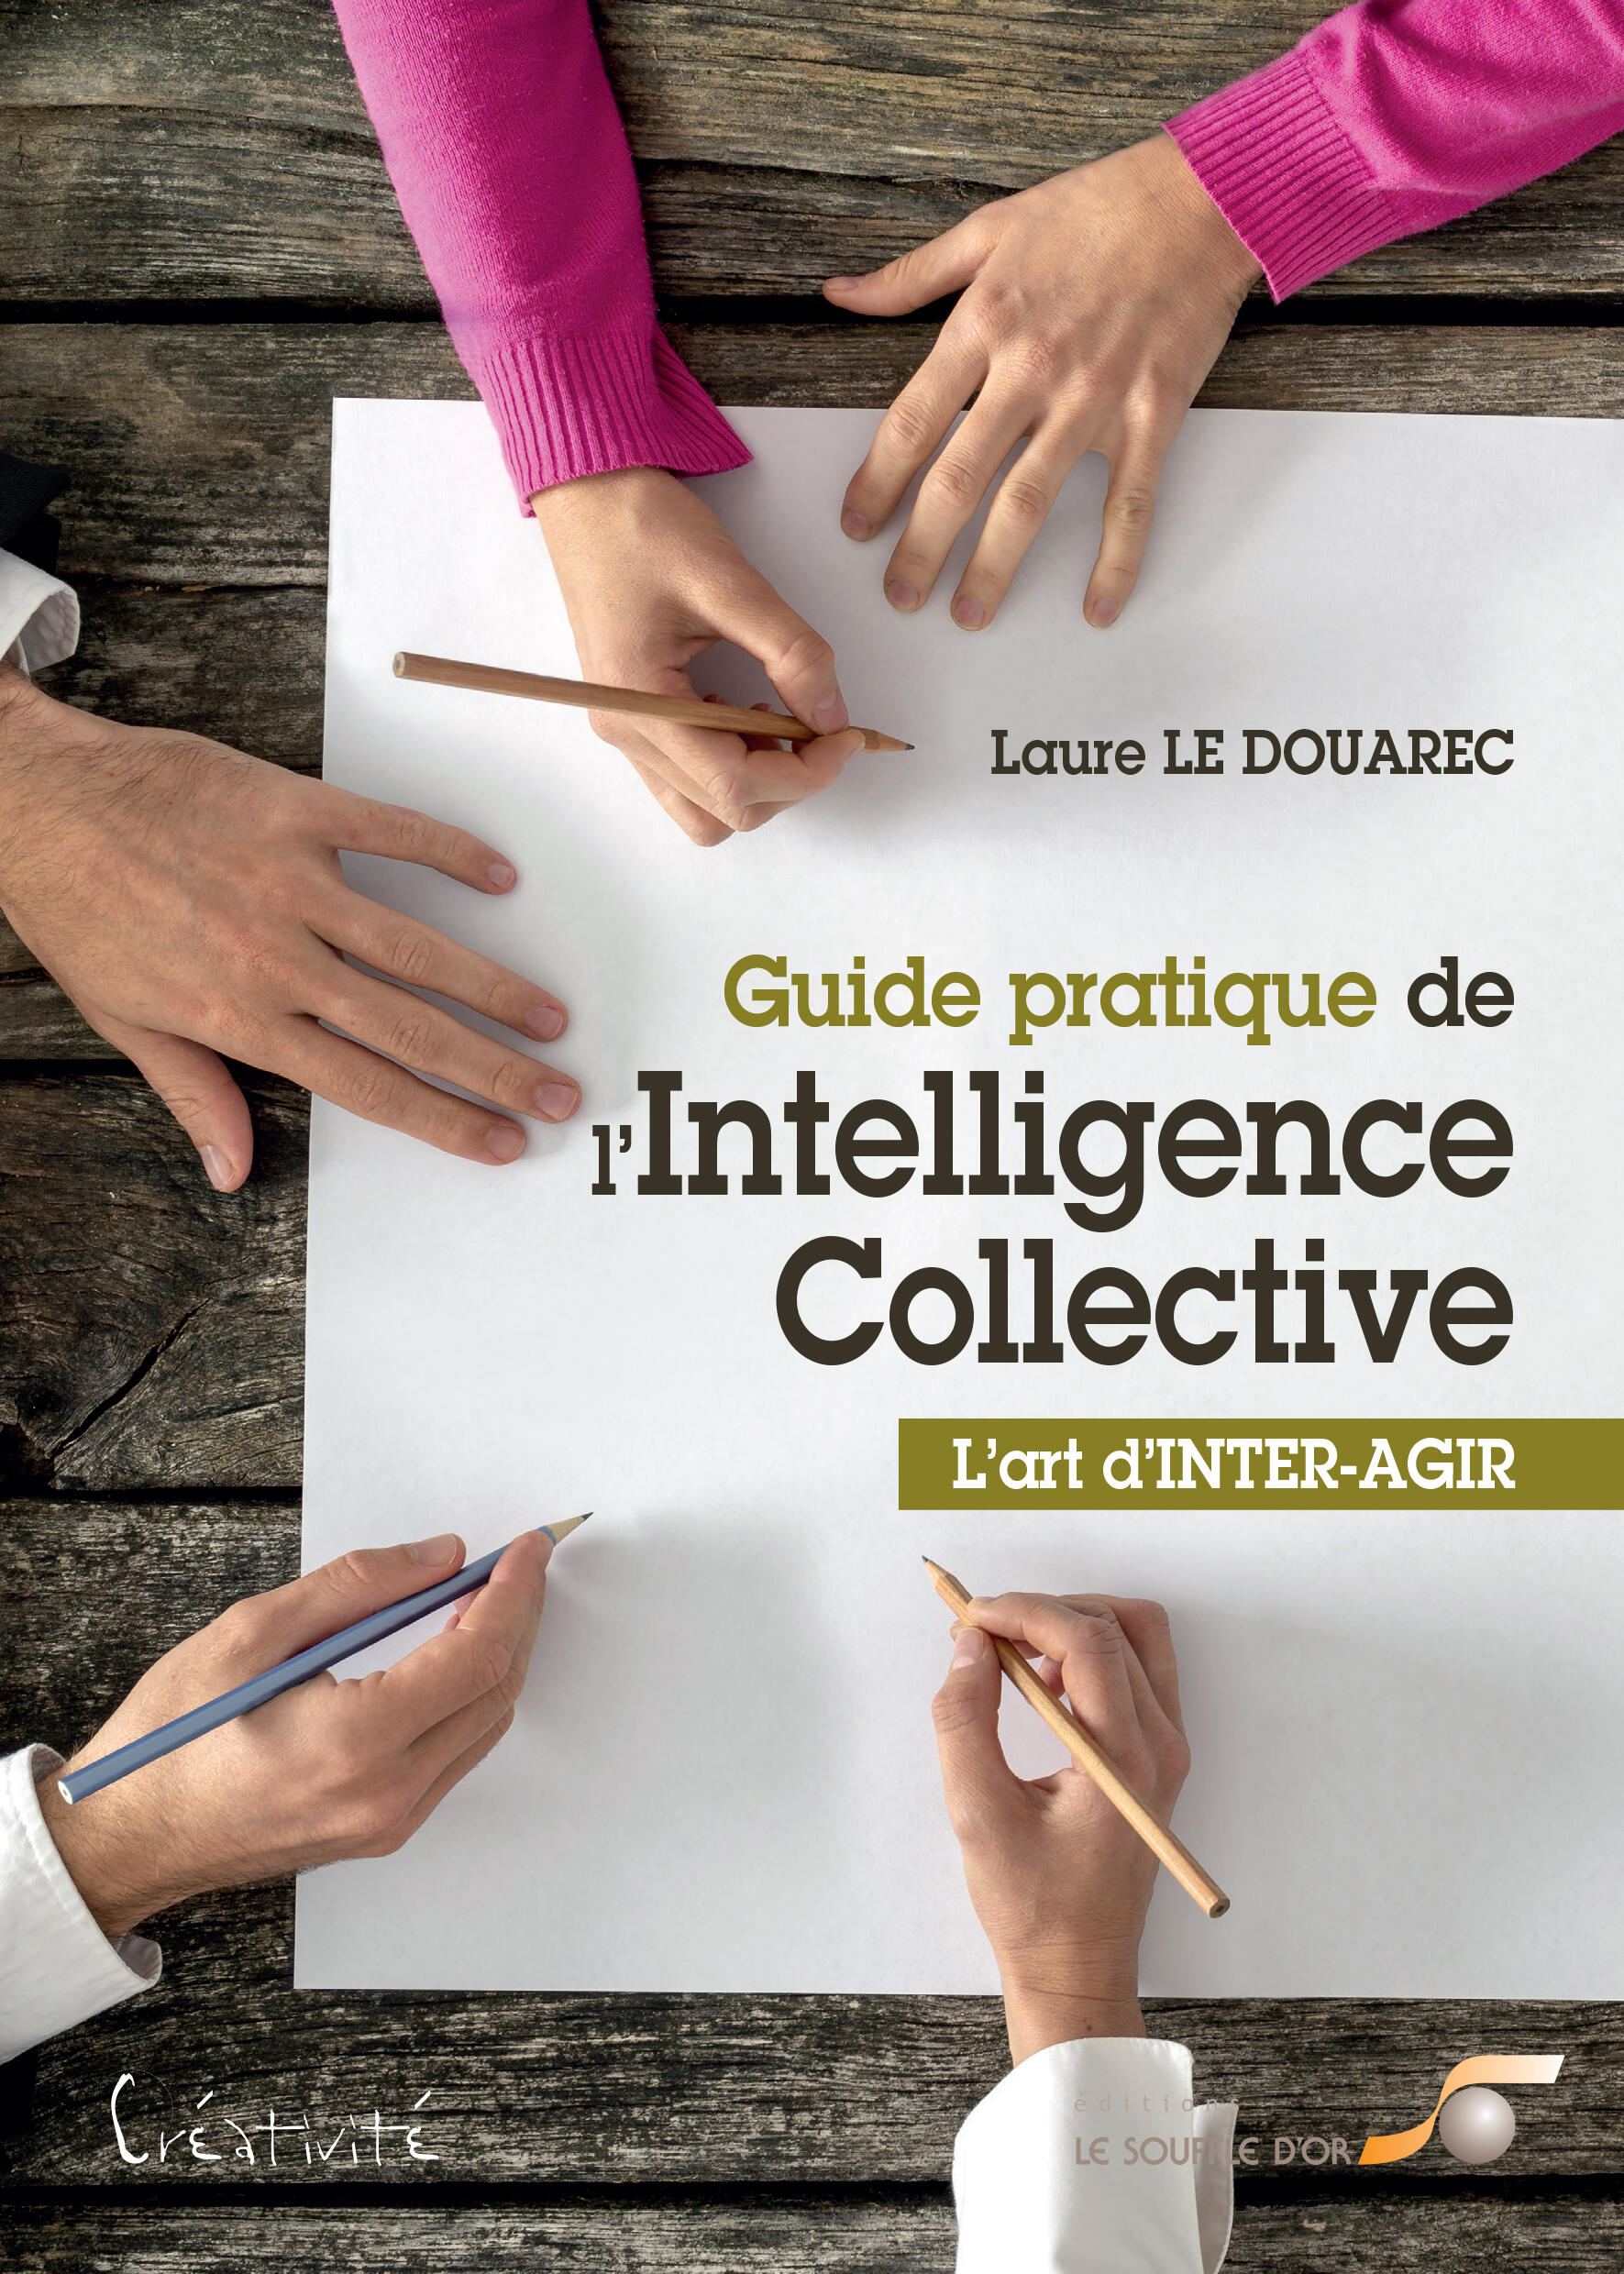 Practical Guide to Collective Intelligence